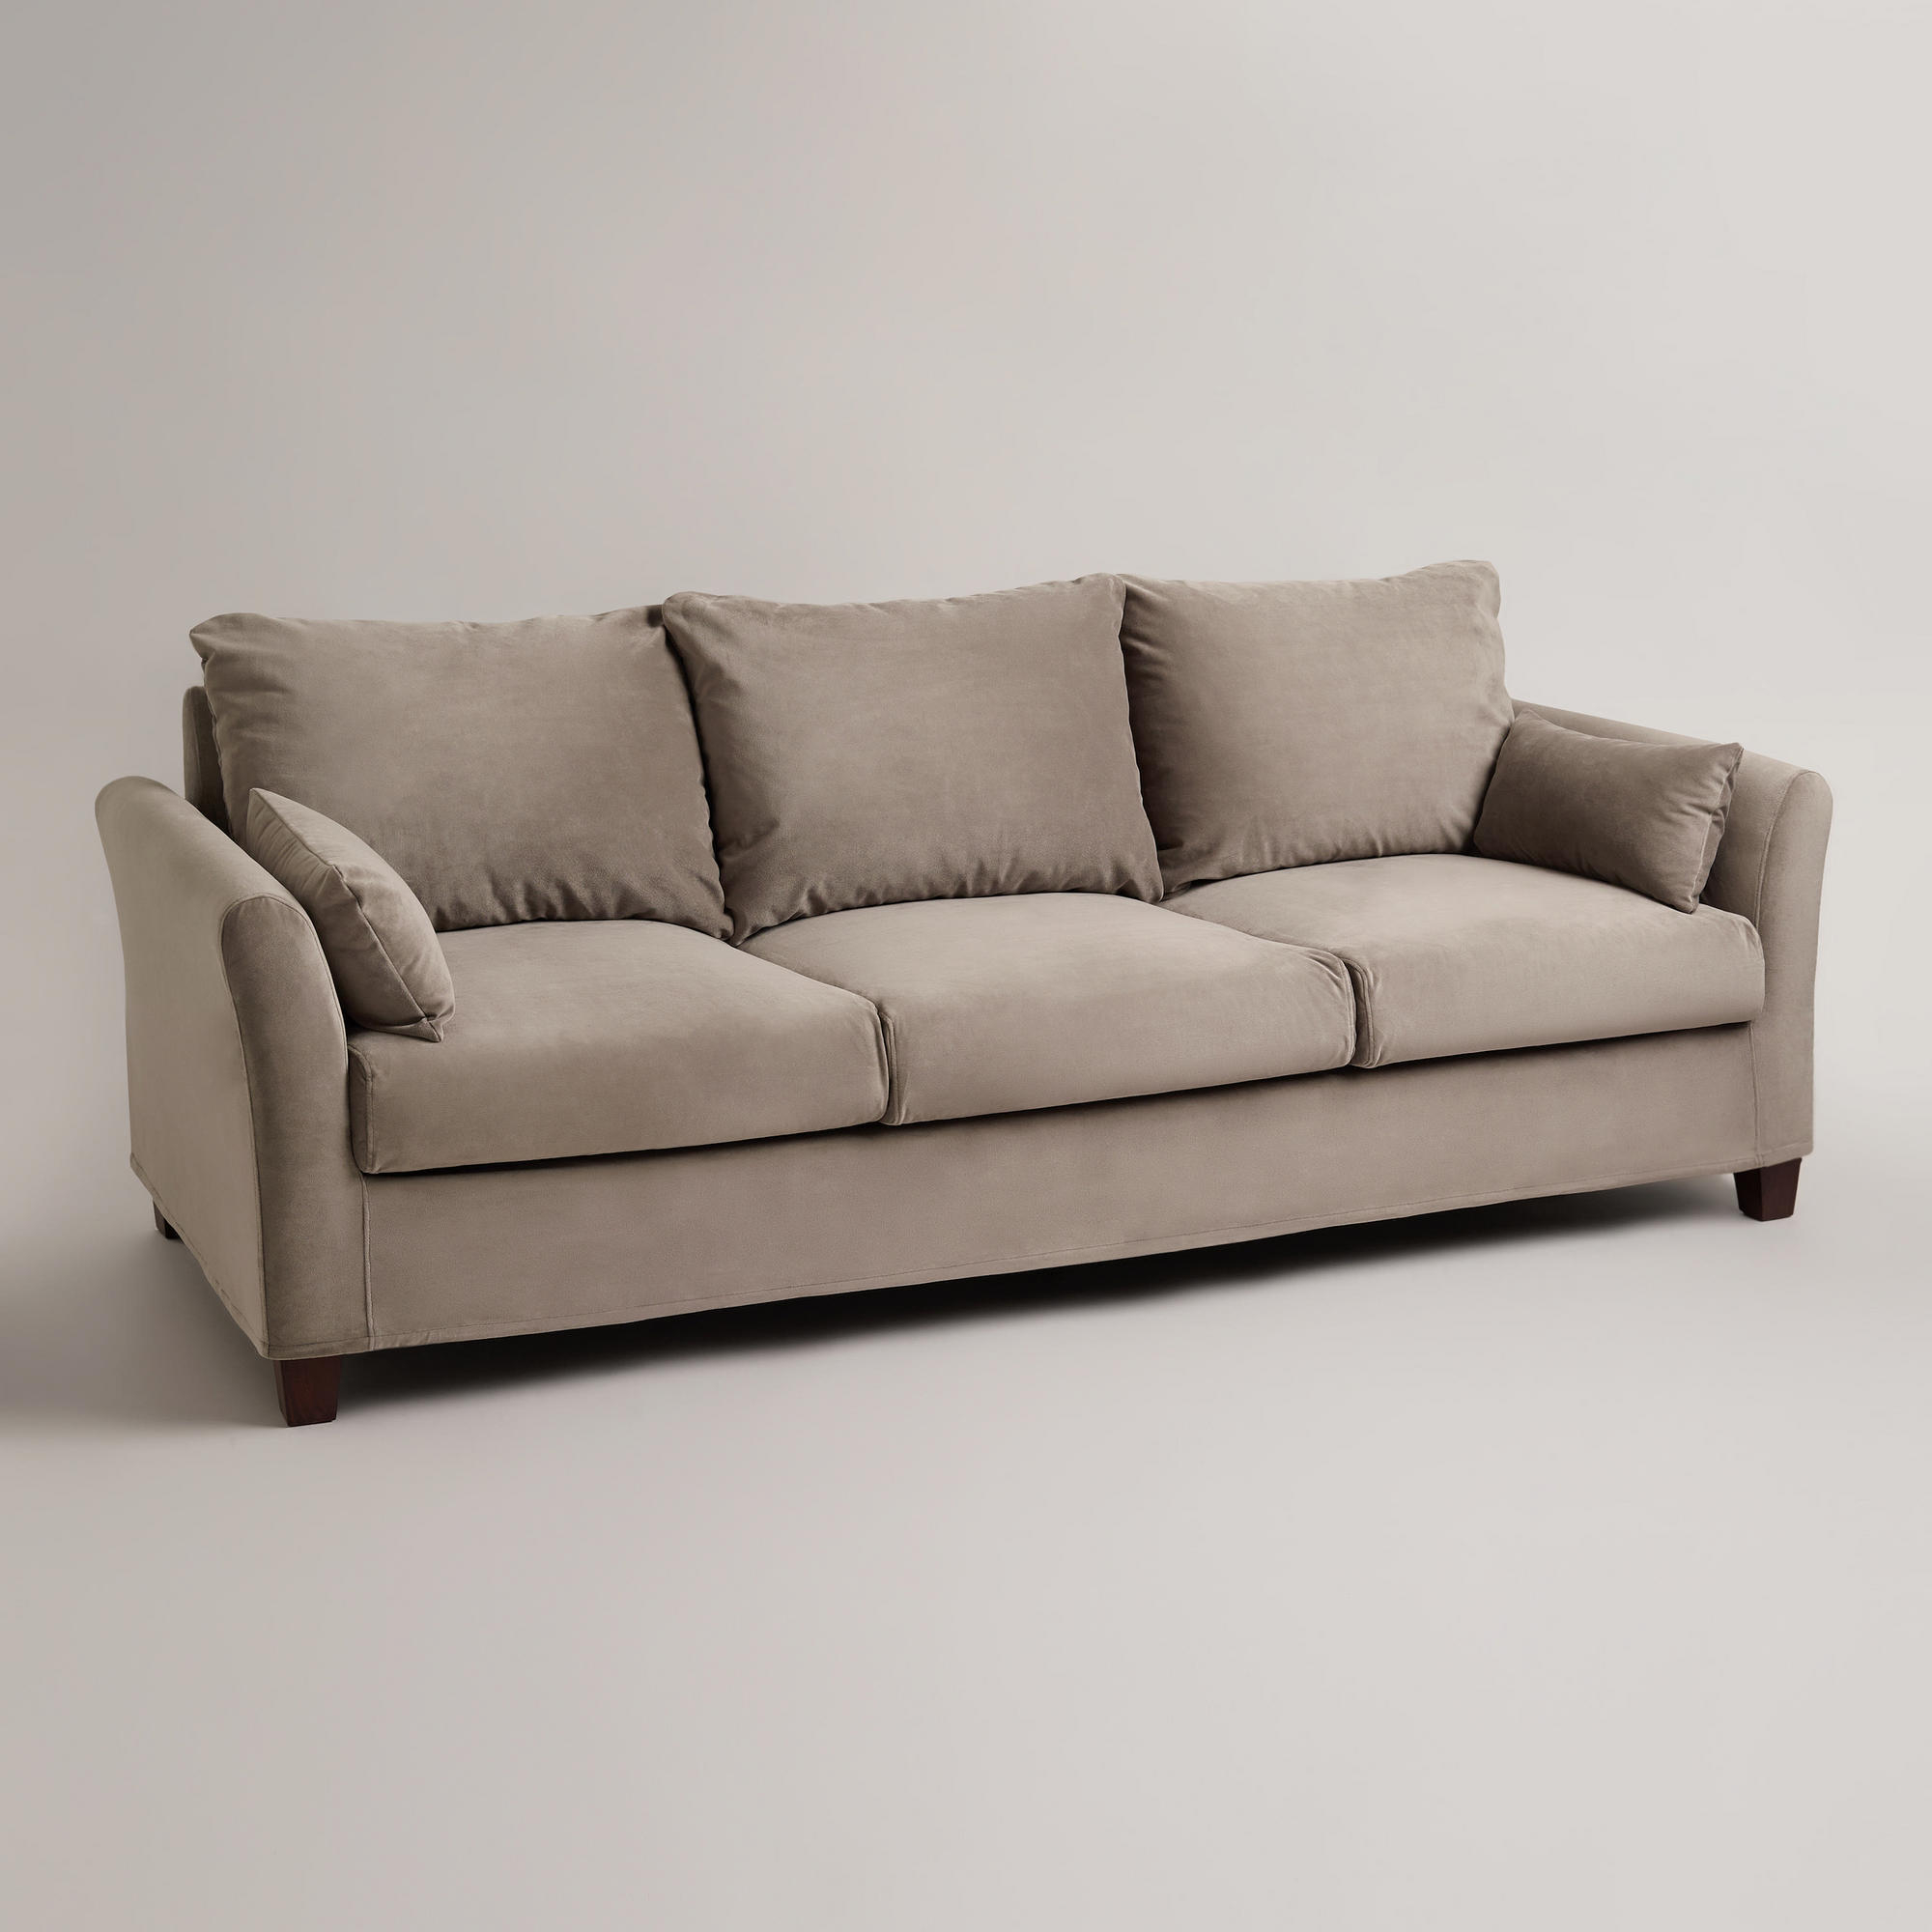 3 Cushion Sofa Slipcover Visualhunt, What Is The Best Slipcover For Leather Sofa